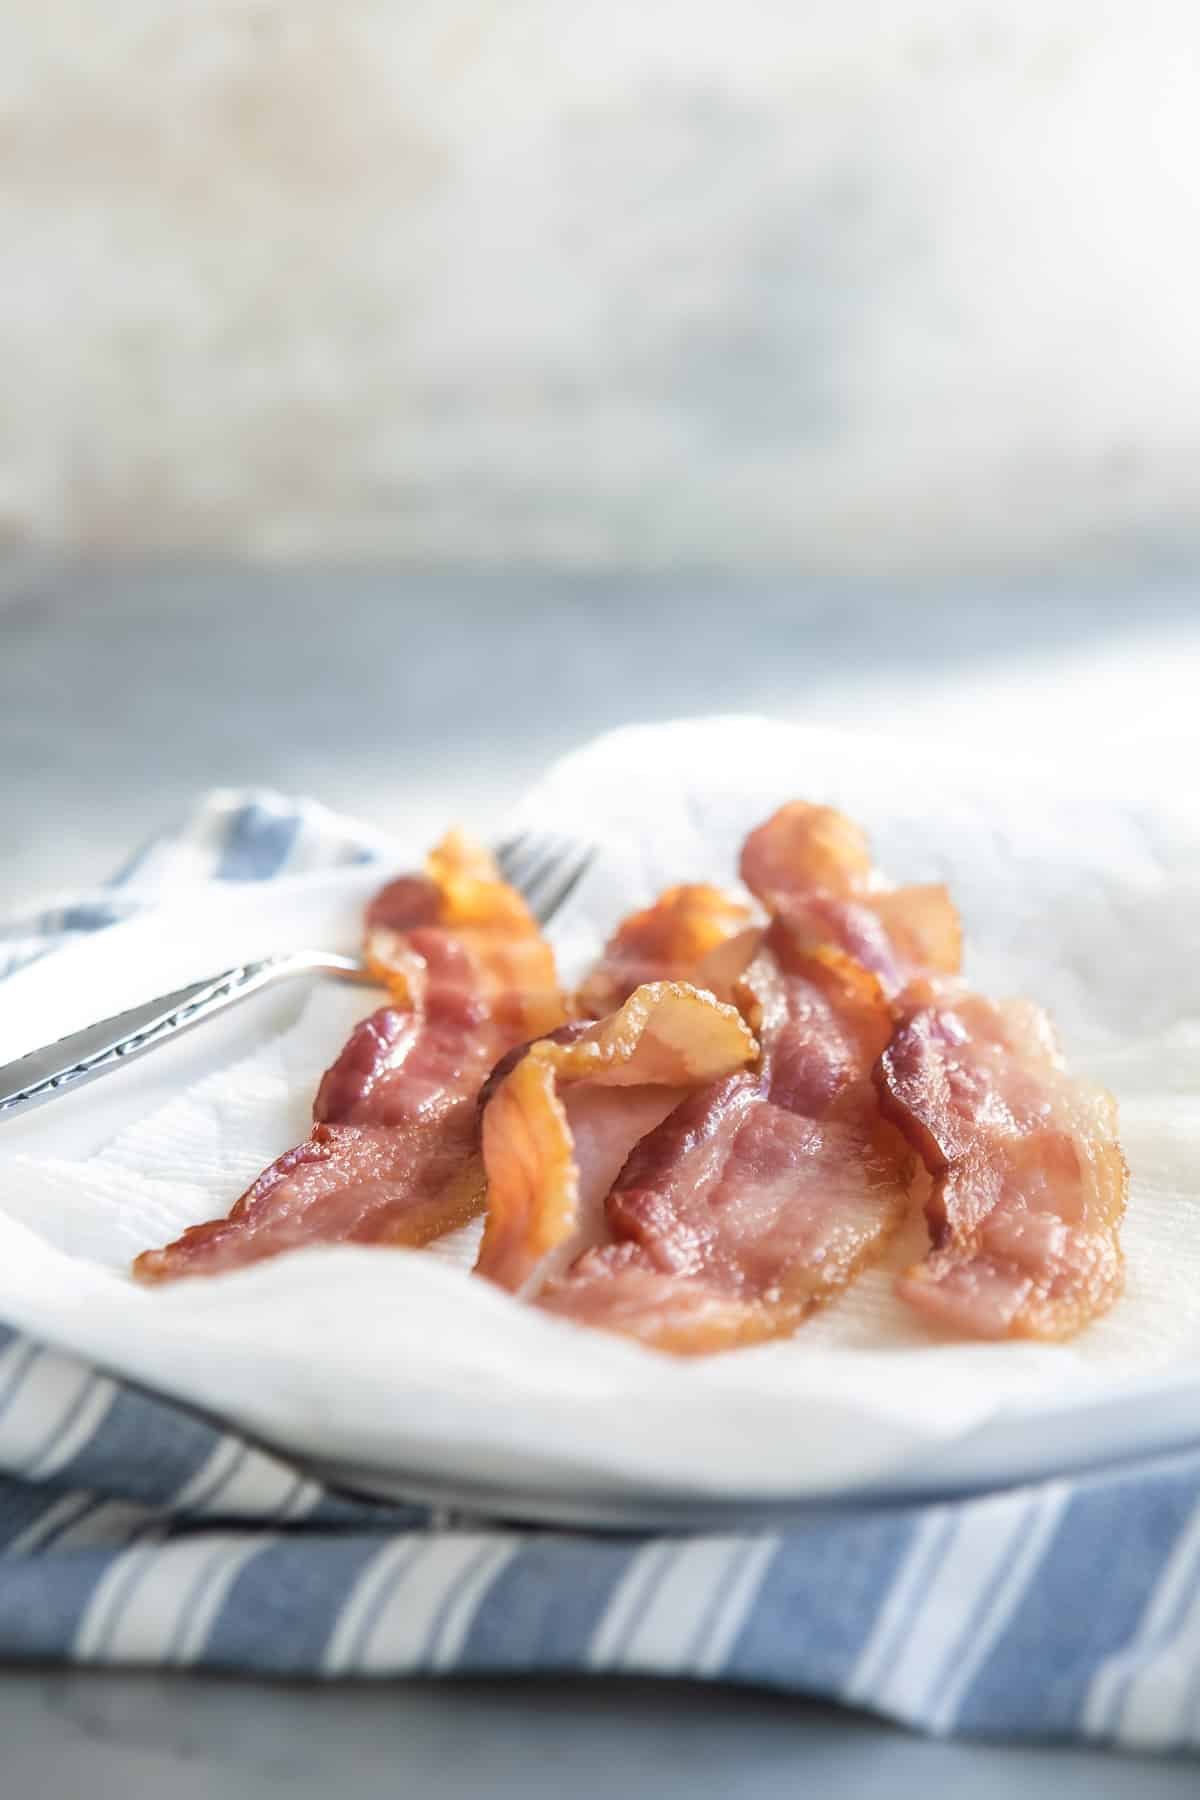 https://www.culinaryhill.com/wp-content/uploads/2023/11/How-to-Fry-Bacon-Culinary-Hill-LR-13.jpg